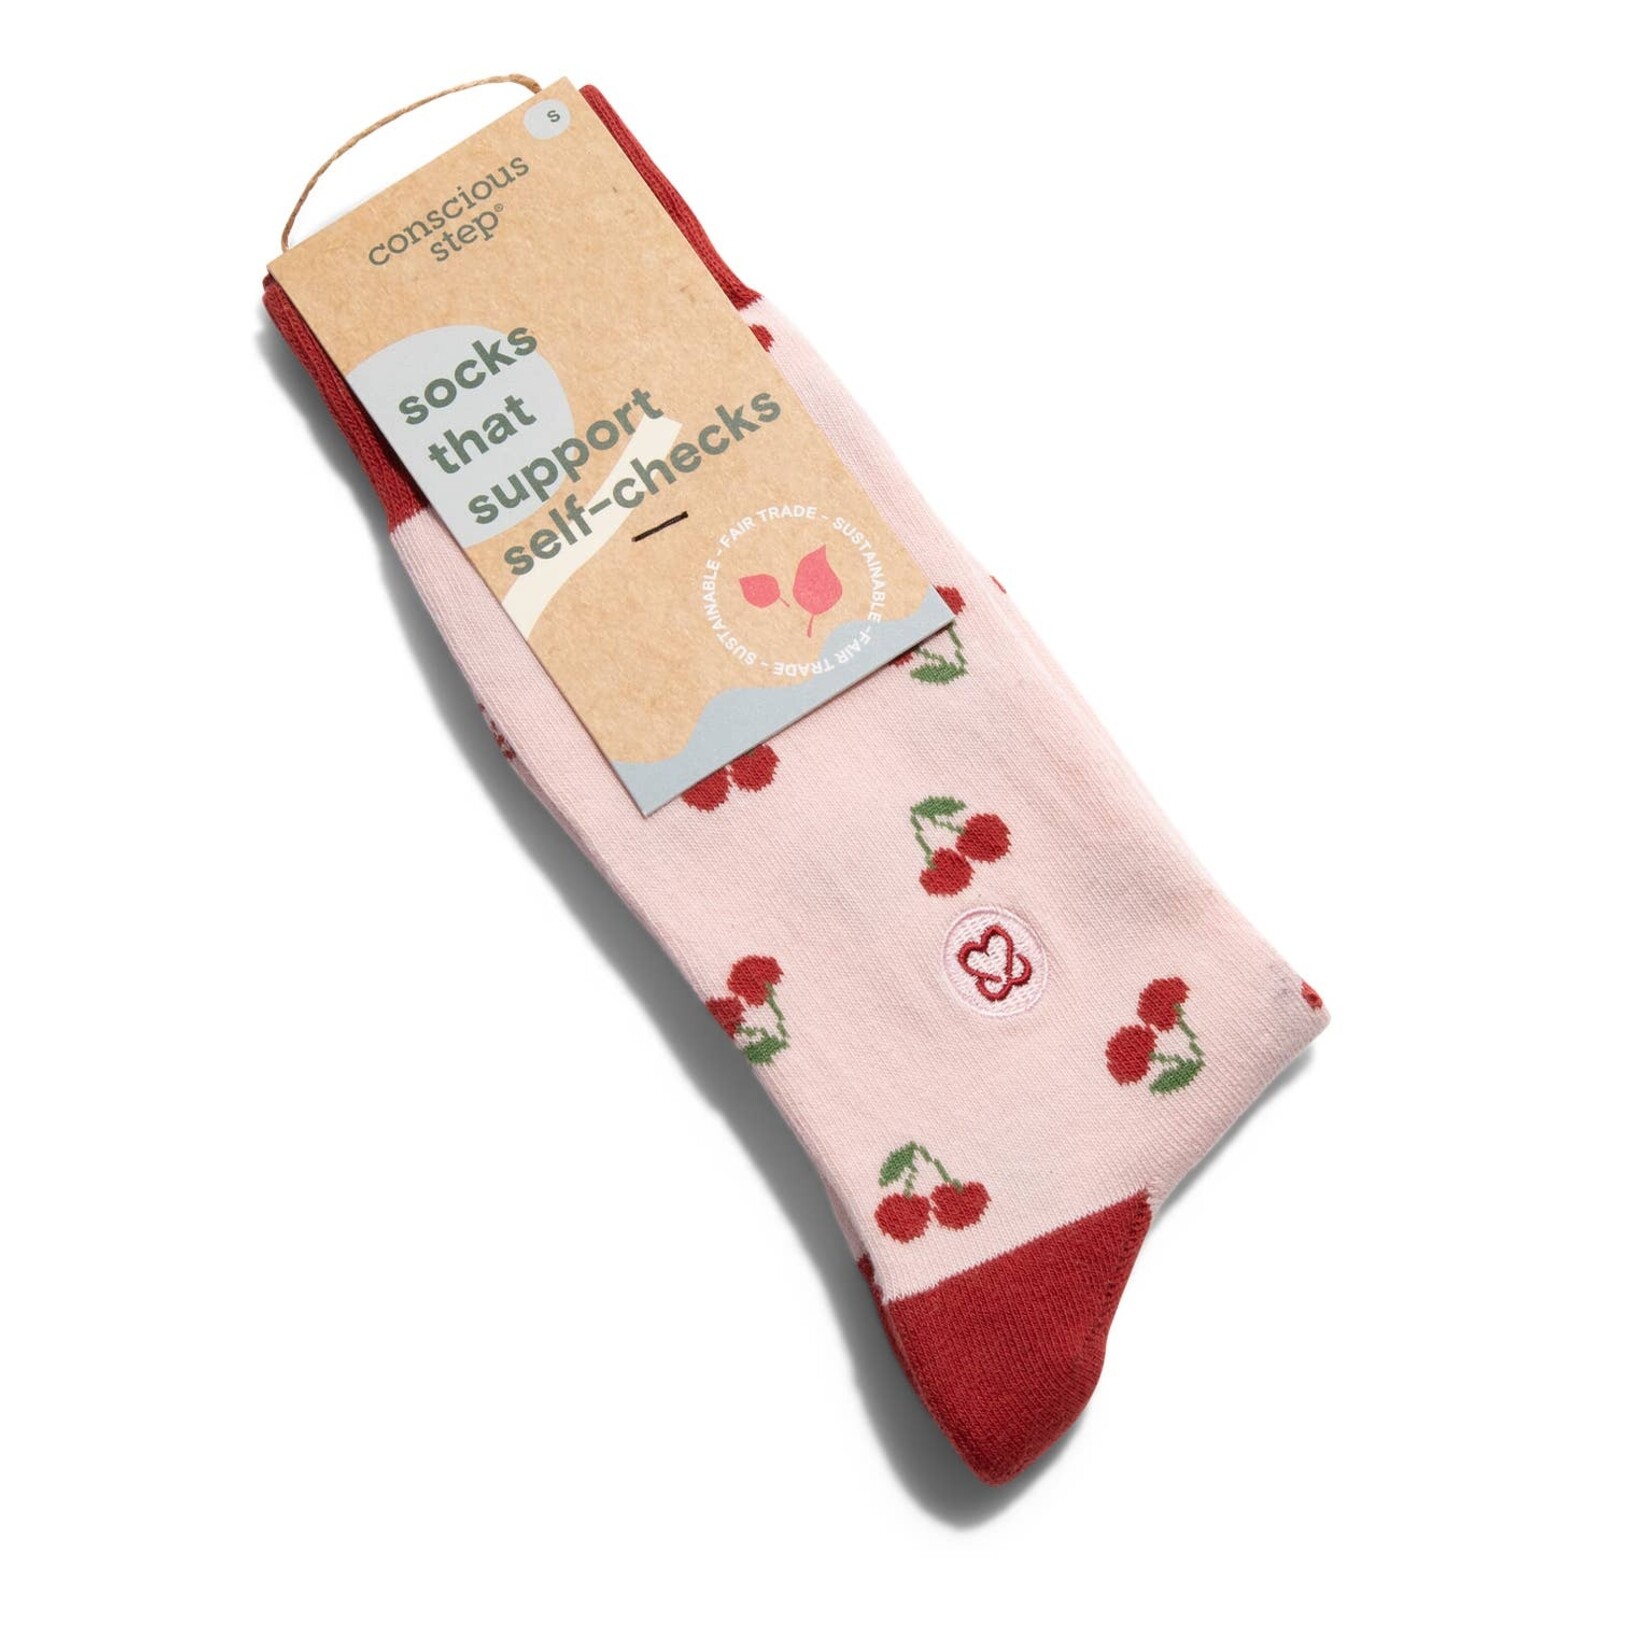 Conscious Step Socks that Support Self-Checks (Pink Cherries) SM